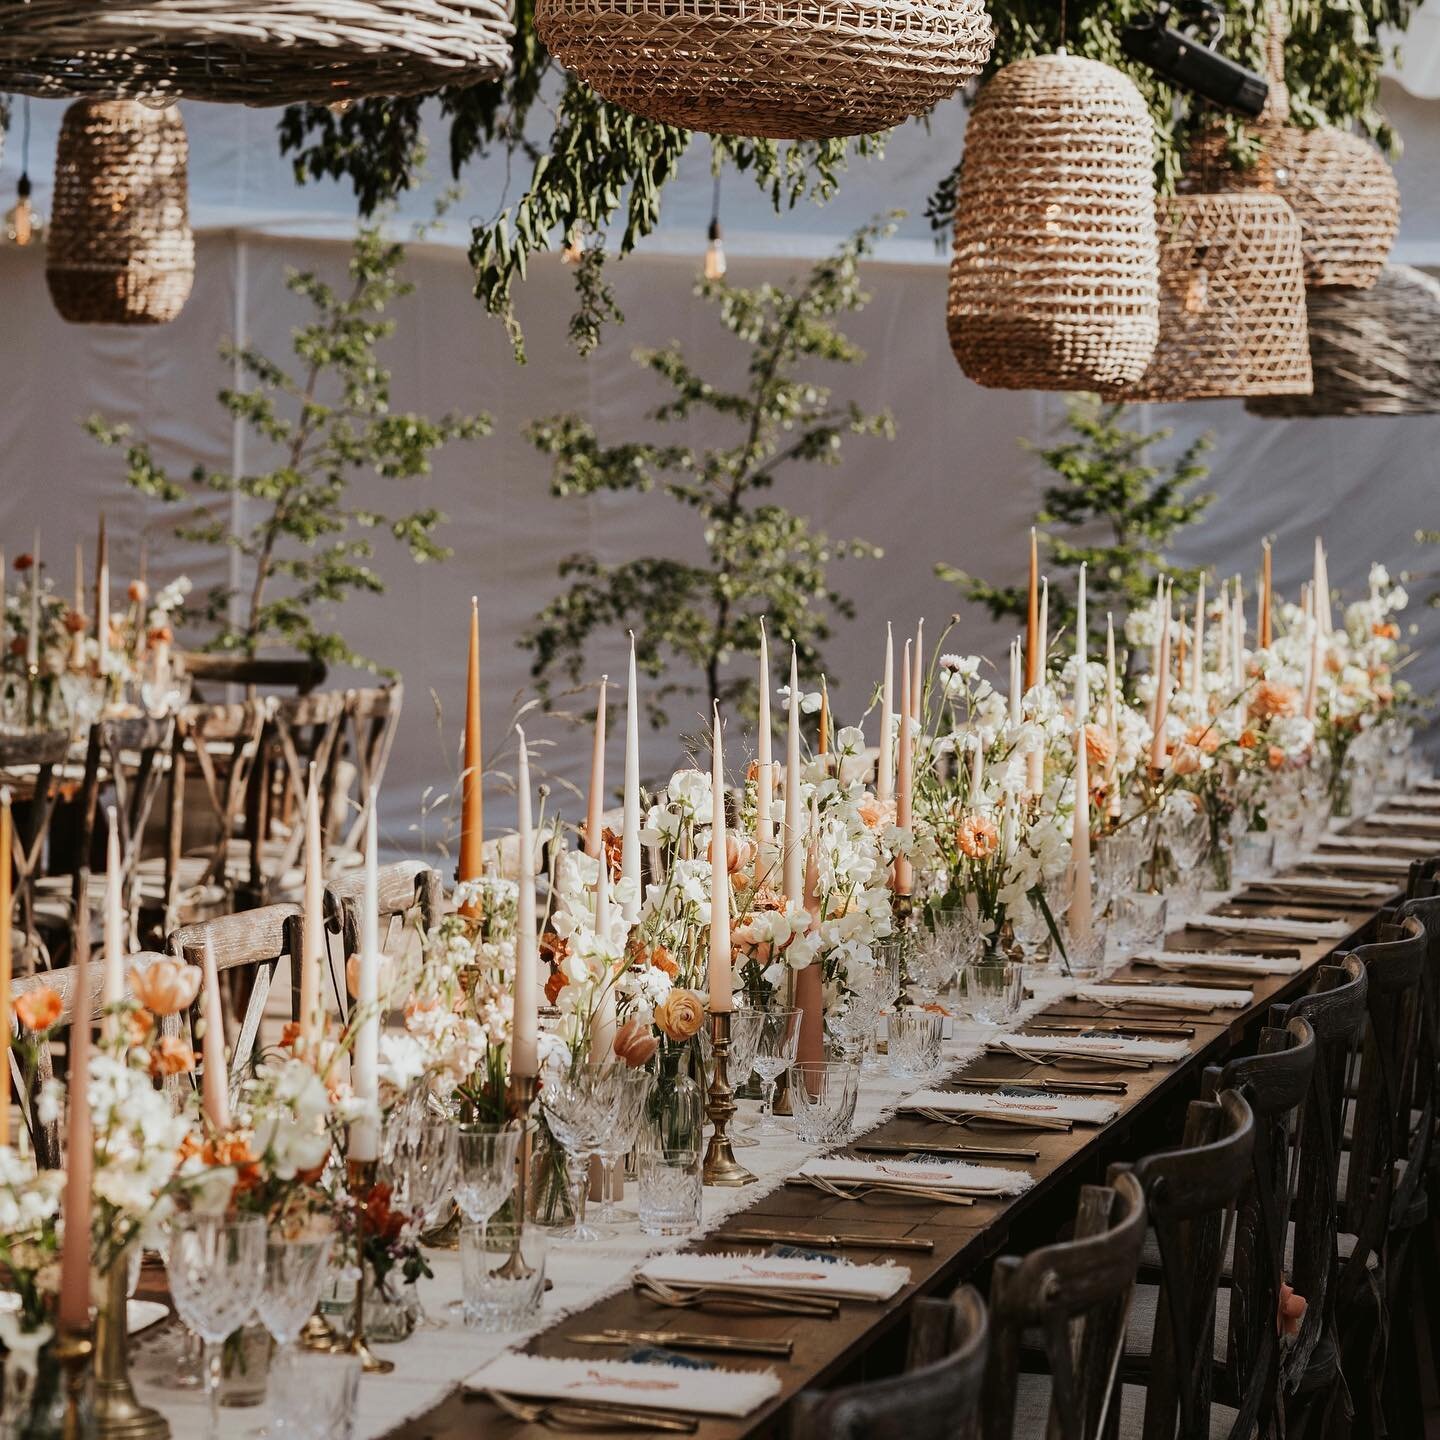 It&rsquo;s all in the details. A sea of tonal bud vases and candles. 

📸 @colinianross 

#eventplanner #eventdesign #eventstylist #blooms #weddingtablesetting #weddingtable #tablescape #fusionwedding #tablesetting #tableware #londonflorist #weddingf